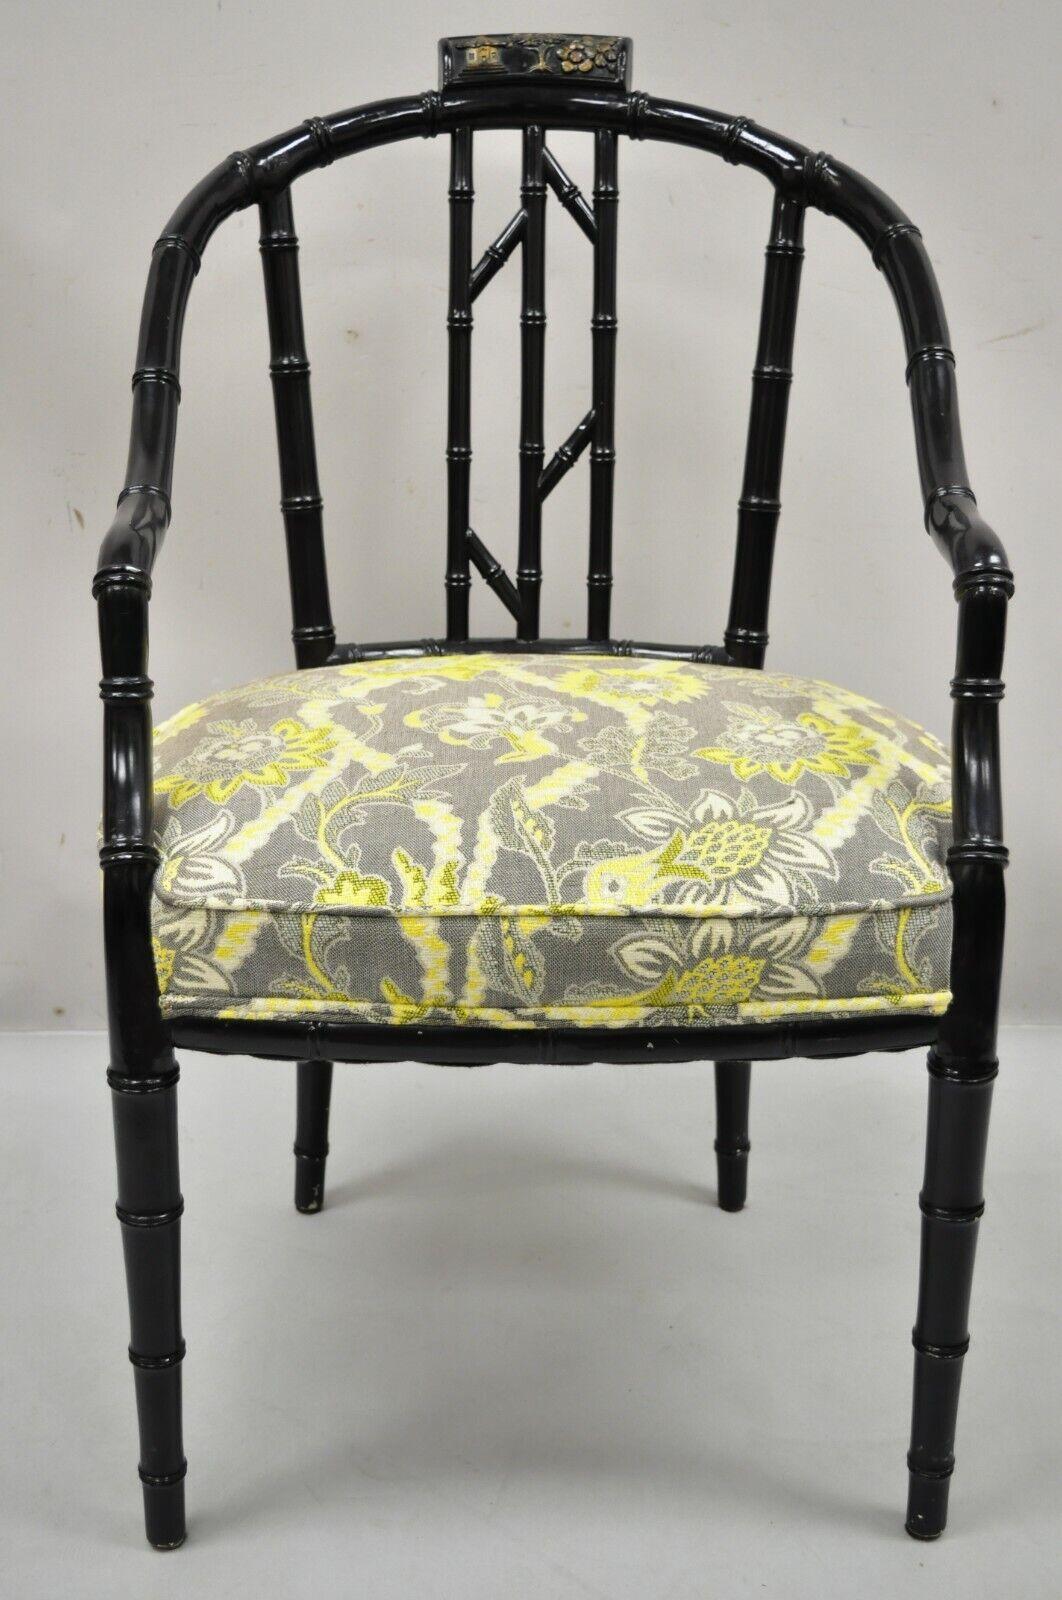 Vintage Chinese Chippendale black lacquer faux bamboo fretwork lounge chair. Item features carved wood faux bamboo fretwork frame, black lacquer finish, very nice vintage item, great style and form. Mid to late 20th century. Measurements: 38.5